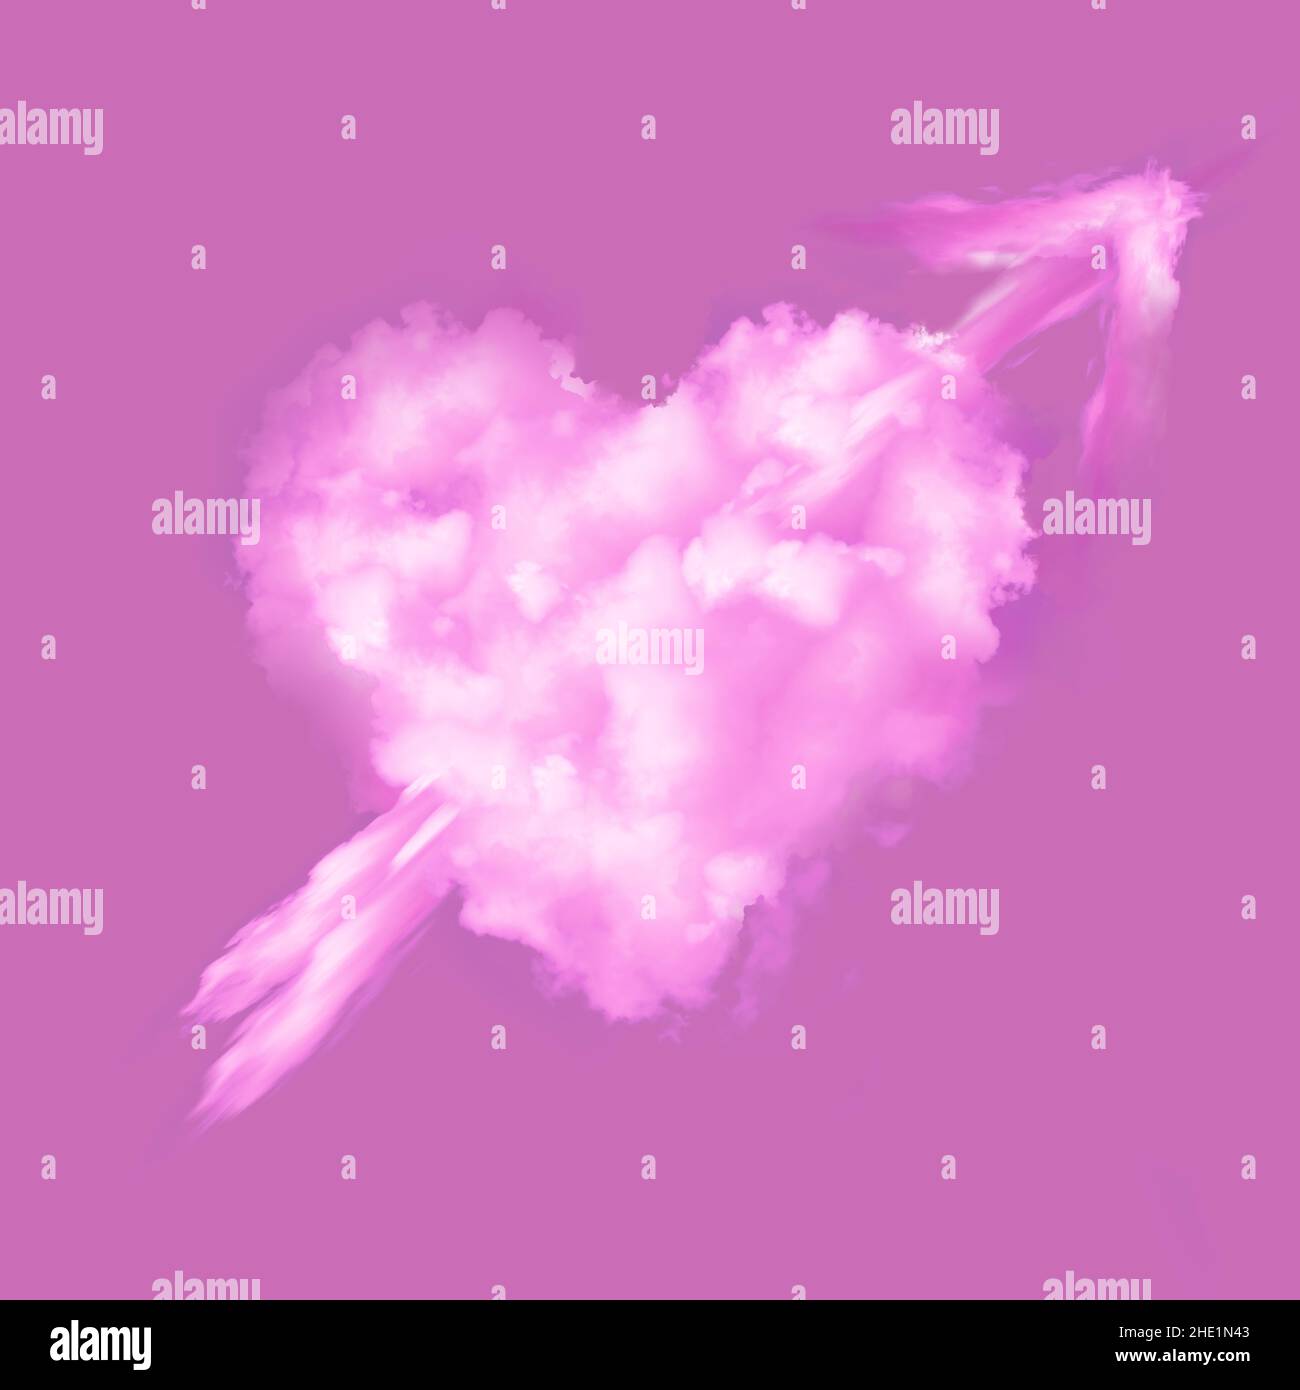 Love heart real pink cloud graphic with arrow on a plain pink background. Valentine symbol of romance and affection Stock Photo